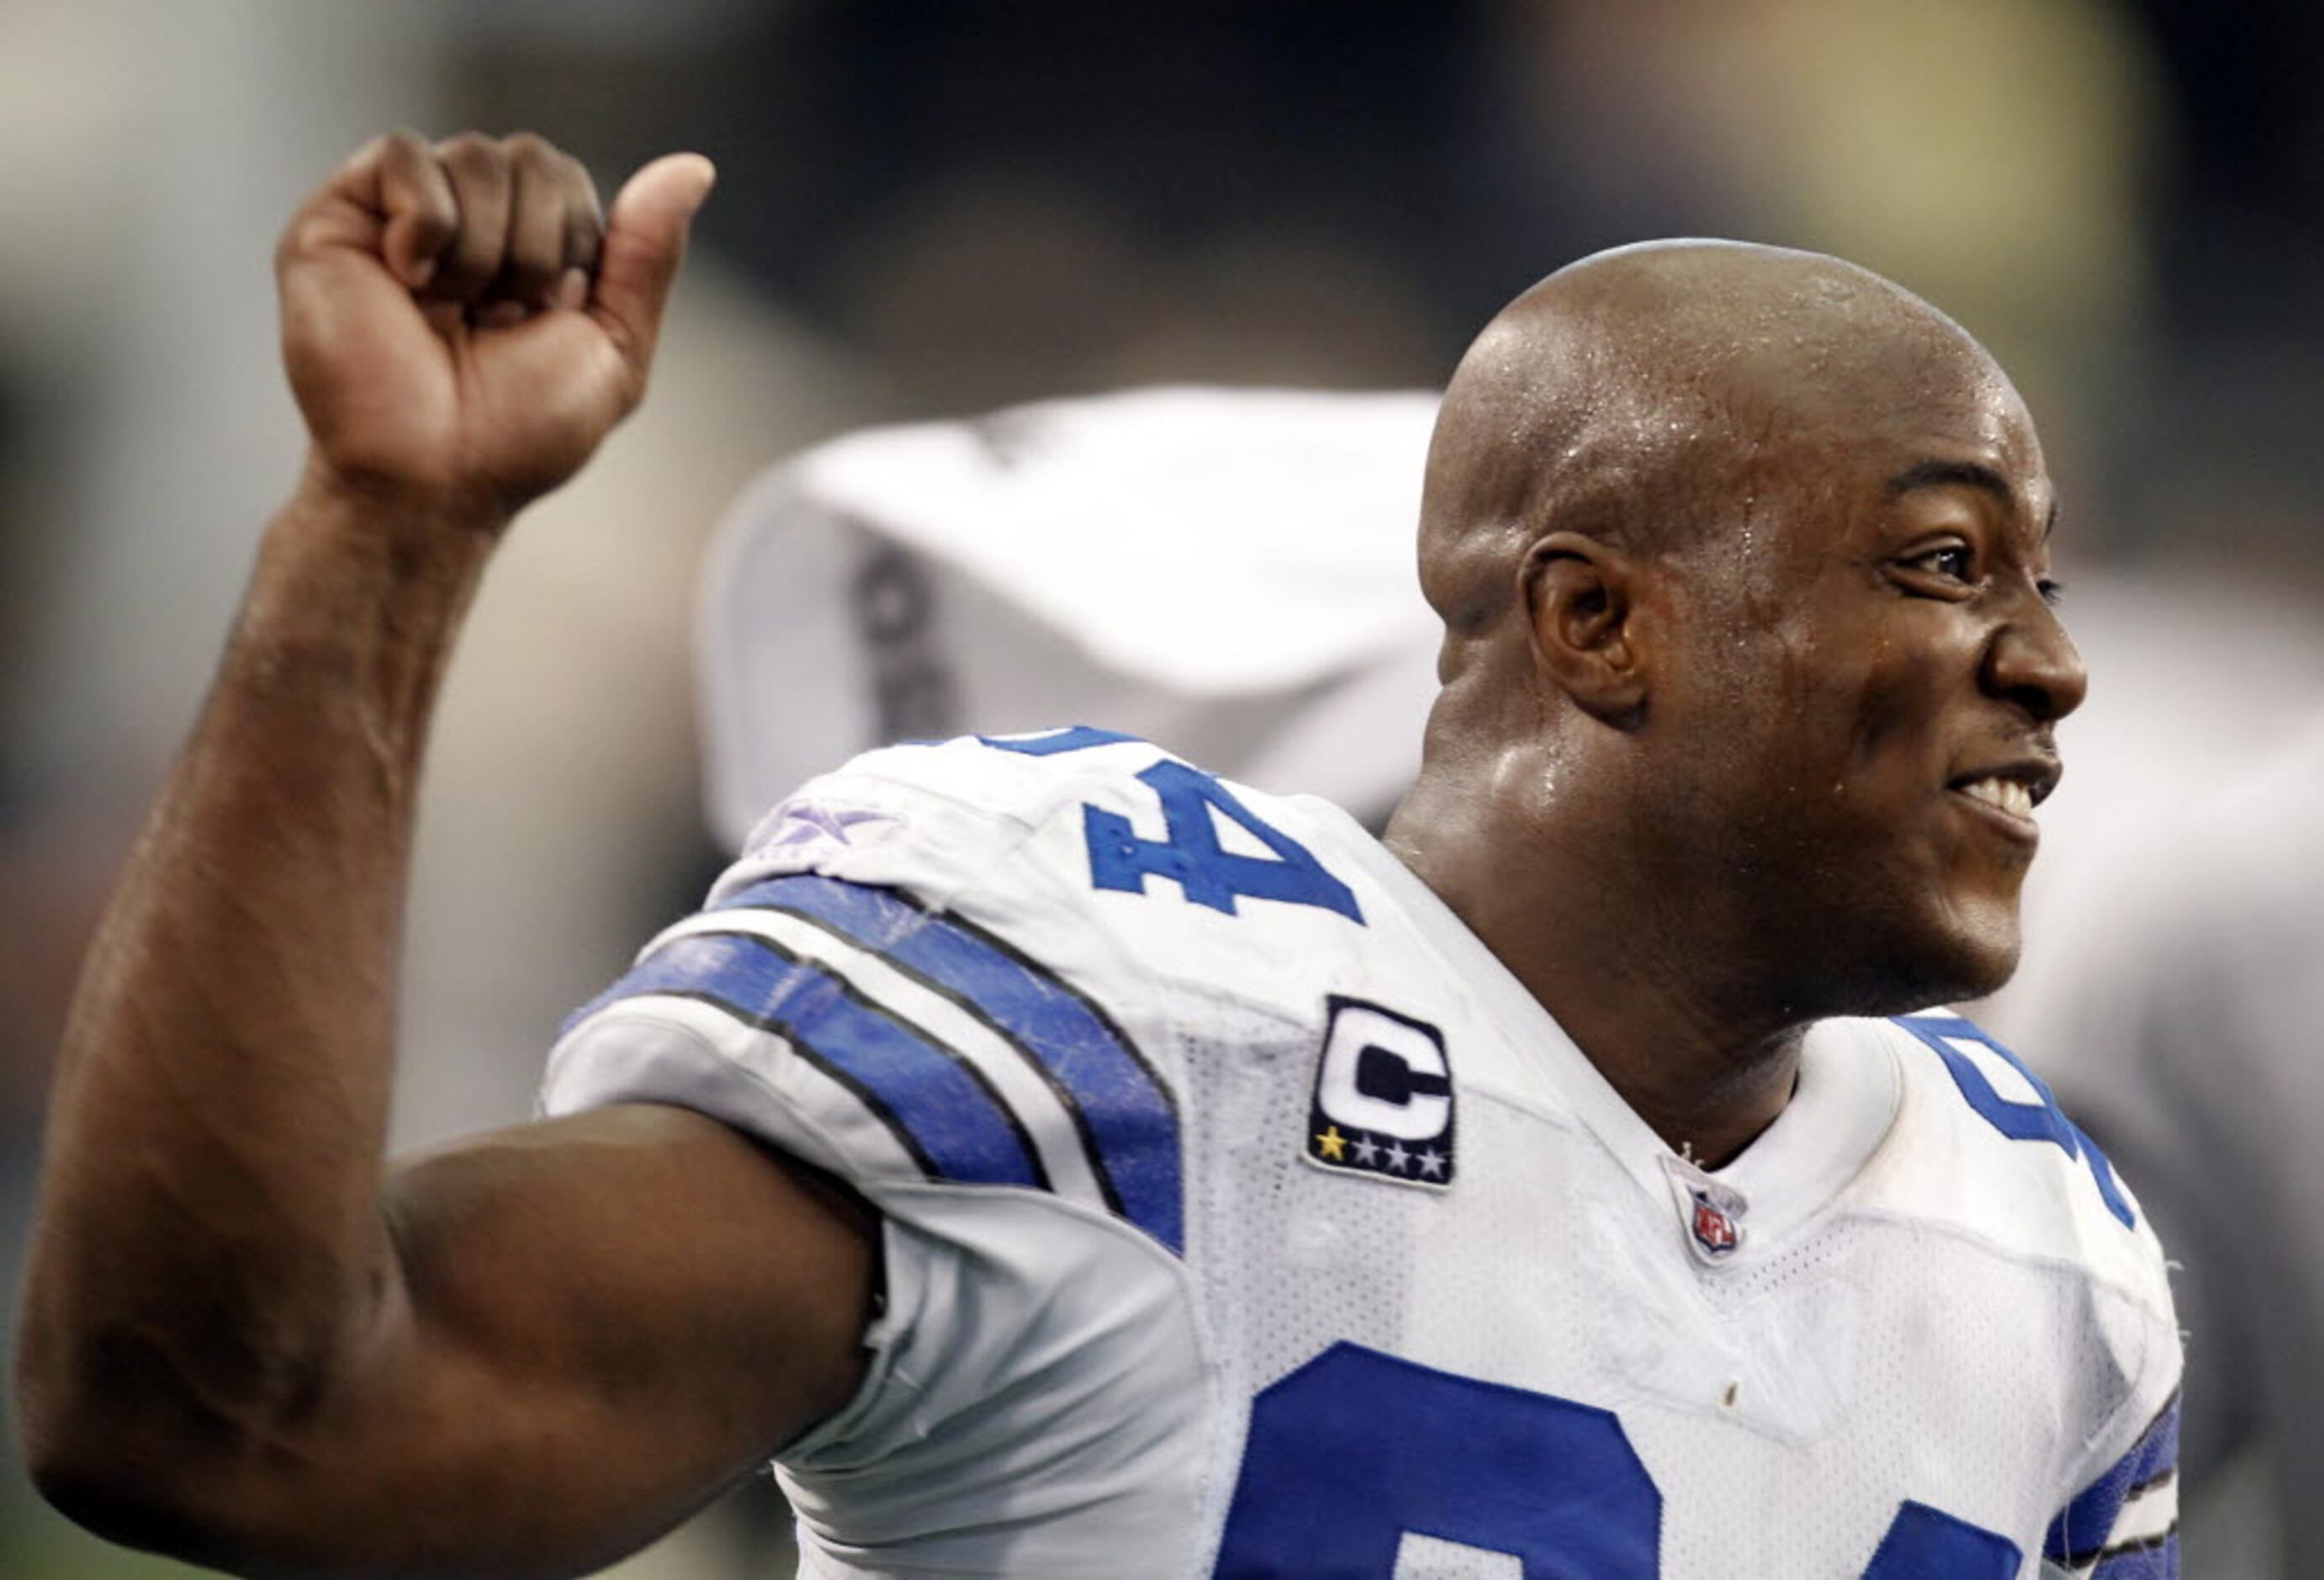 George: Year in, year out, DeMarcus Ware continues to be the Cowboys' rock